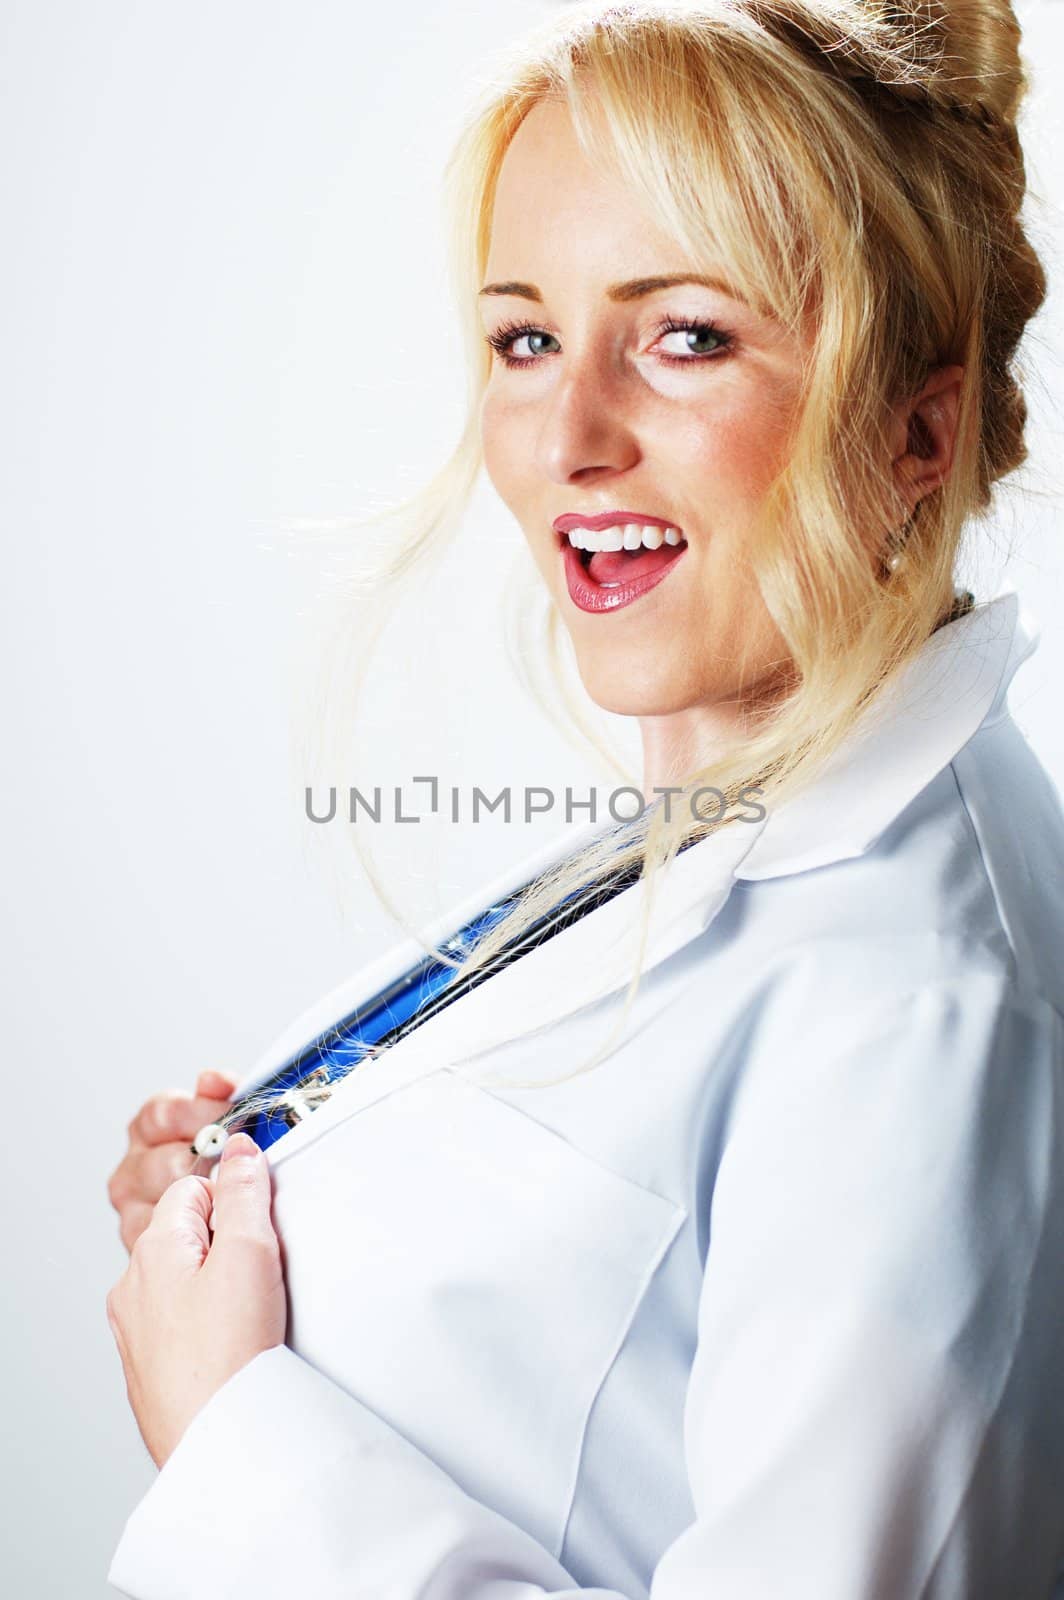 Happy smiling healthcare professional against a white background.